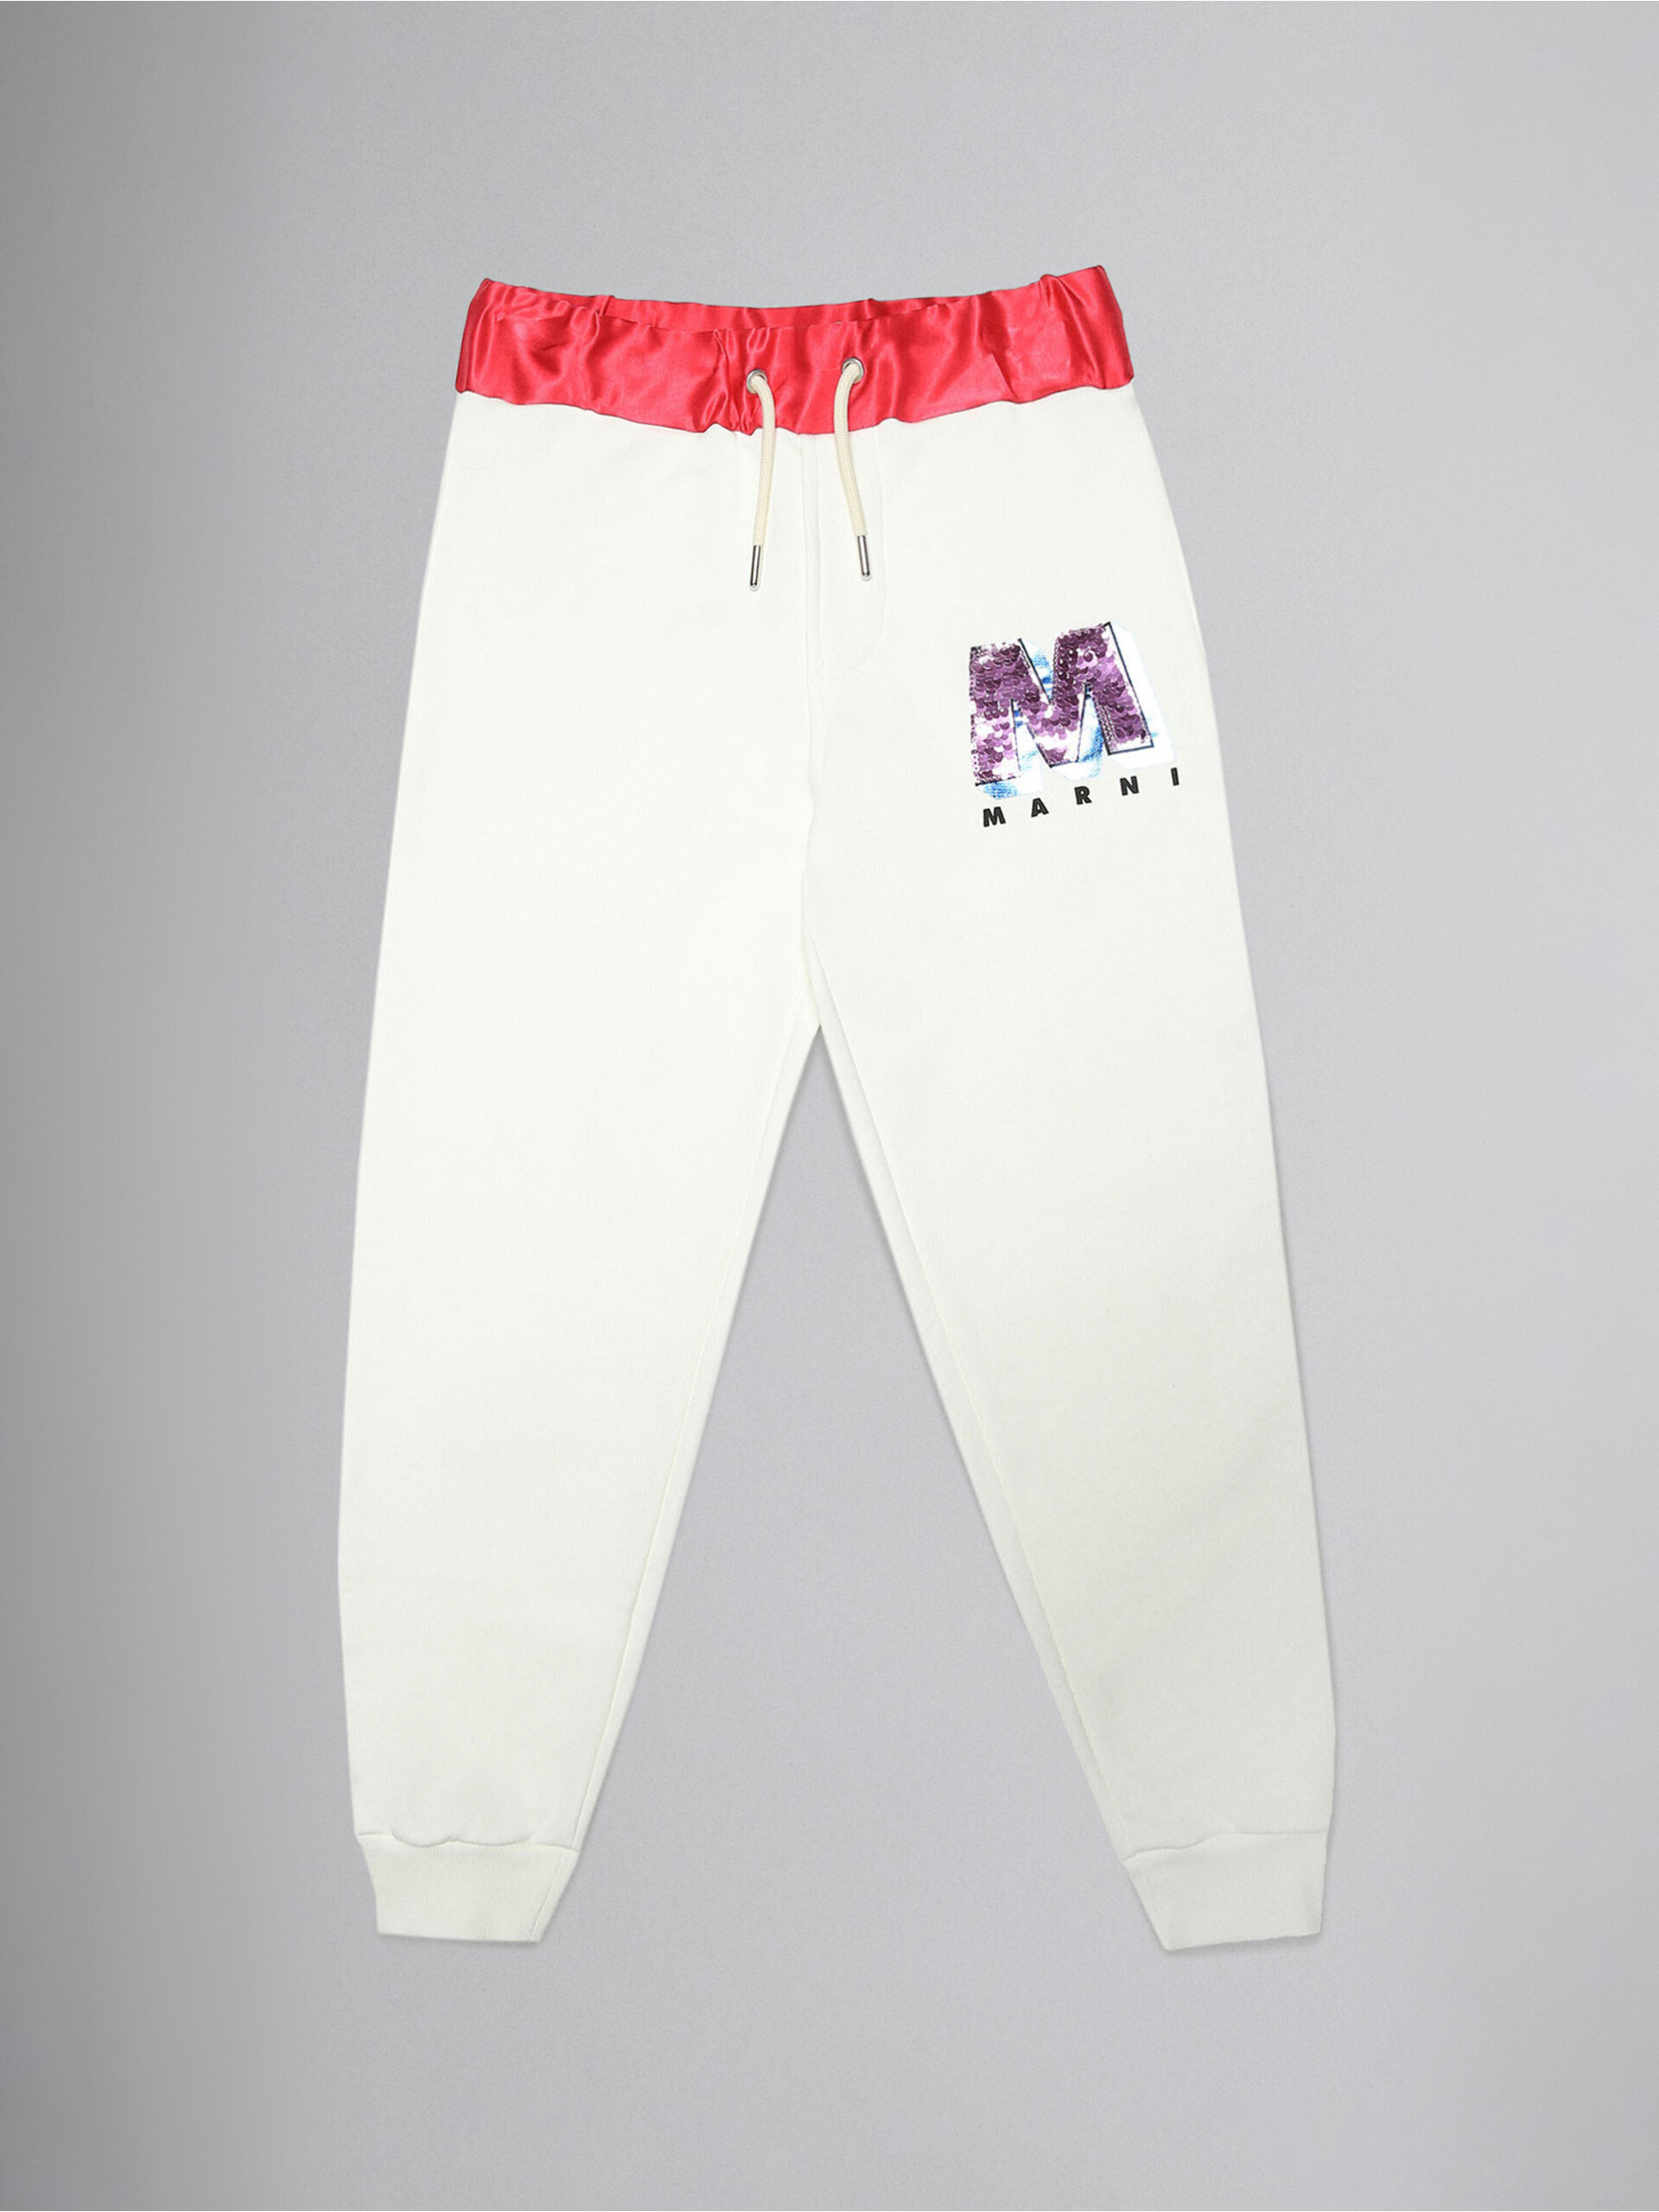 White French terry track pants with sequin "M" patch - Pants - Image 1